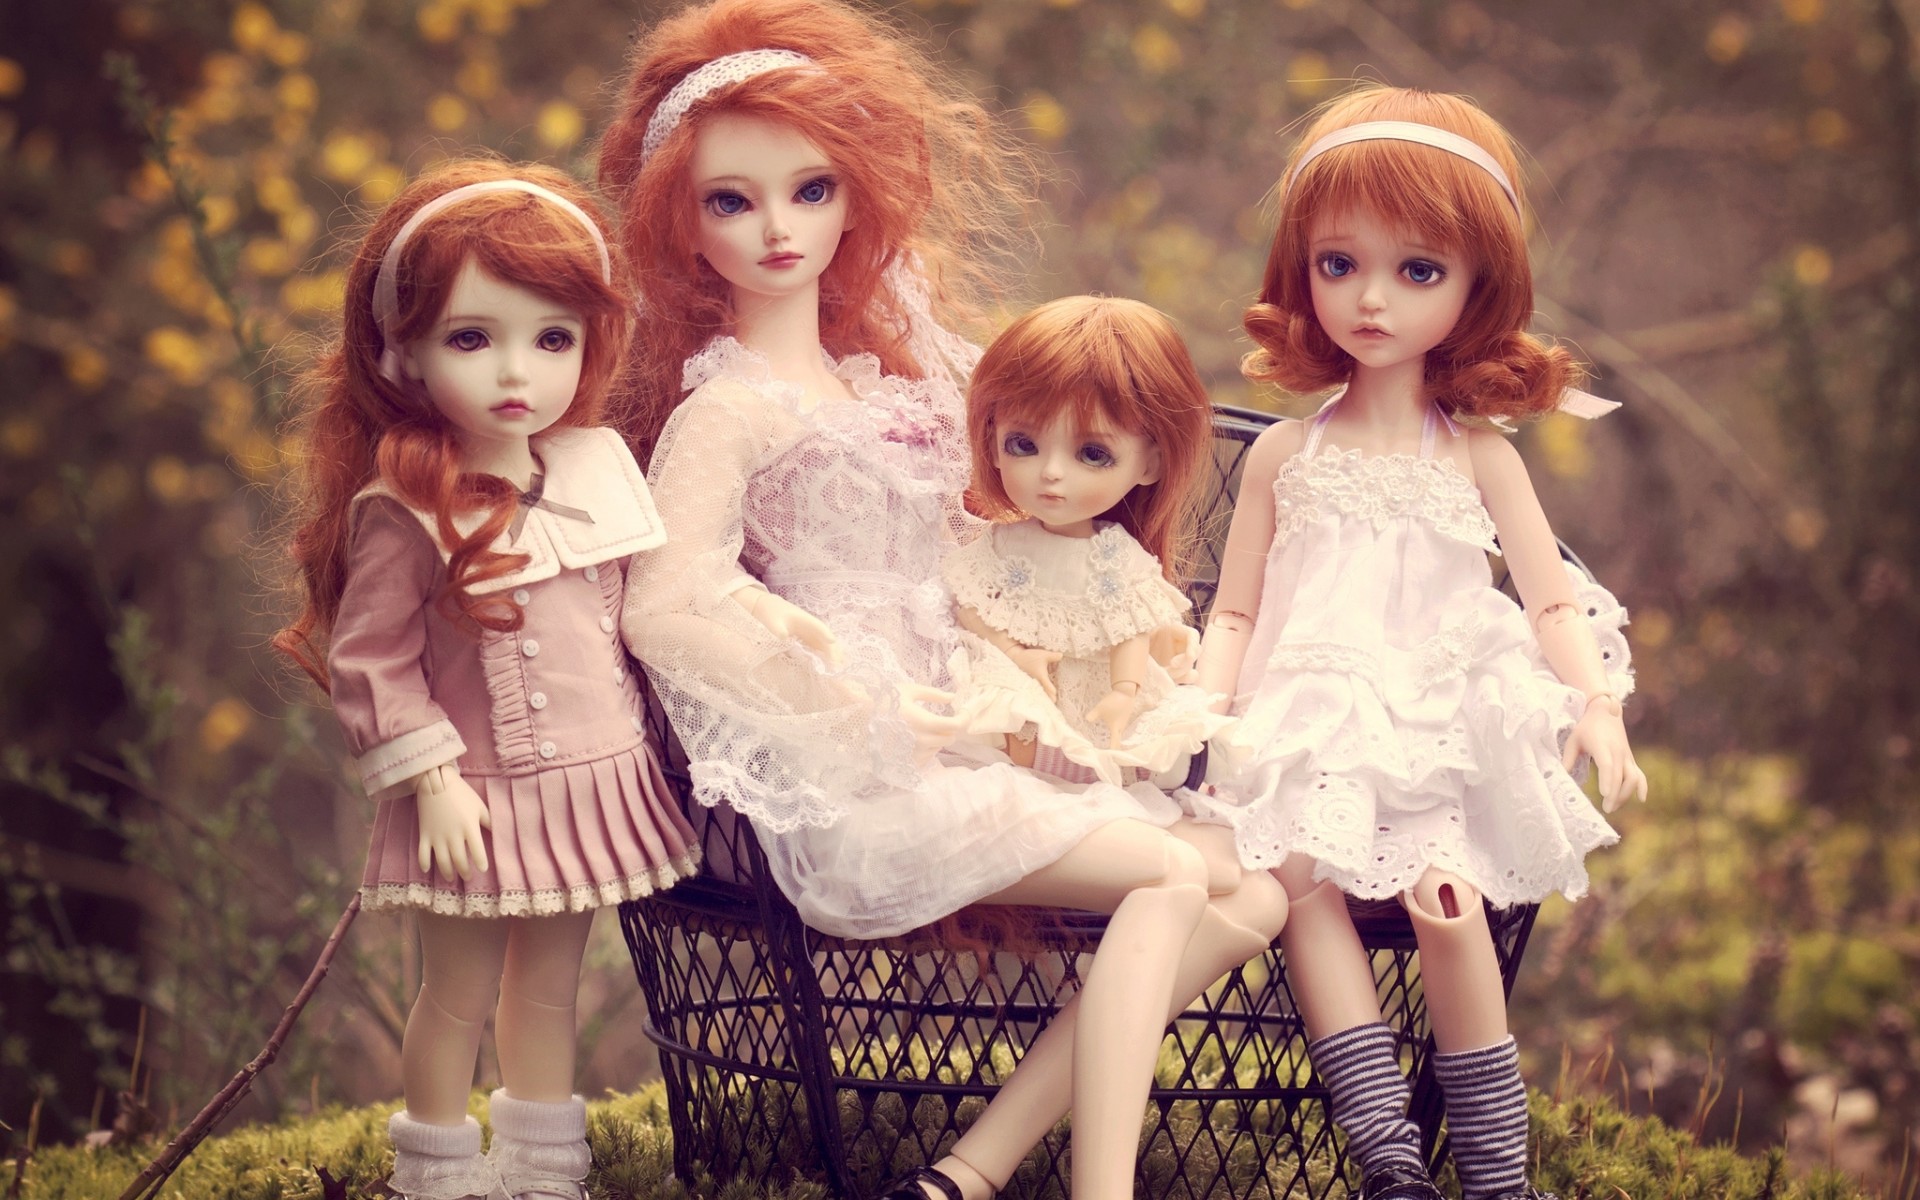 Man Made Doll HD Wallpaper | Background Image